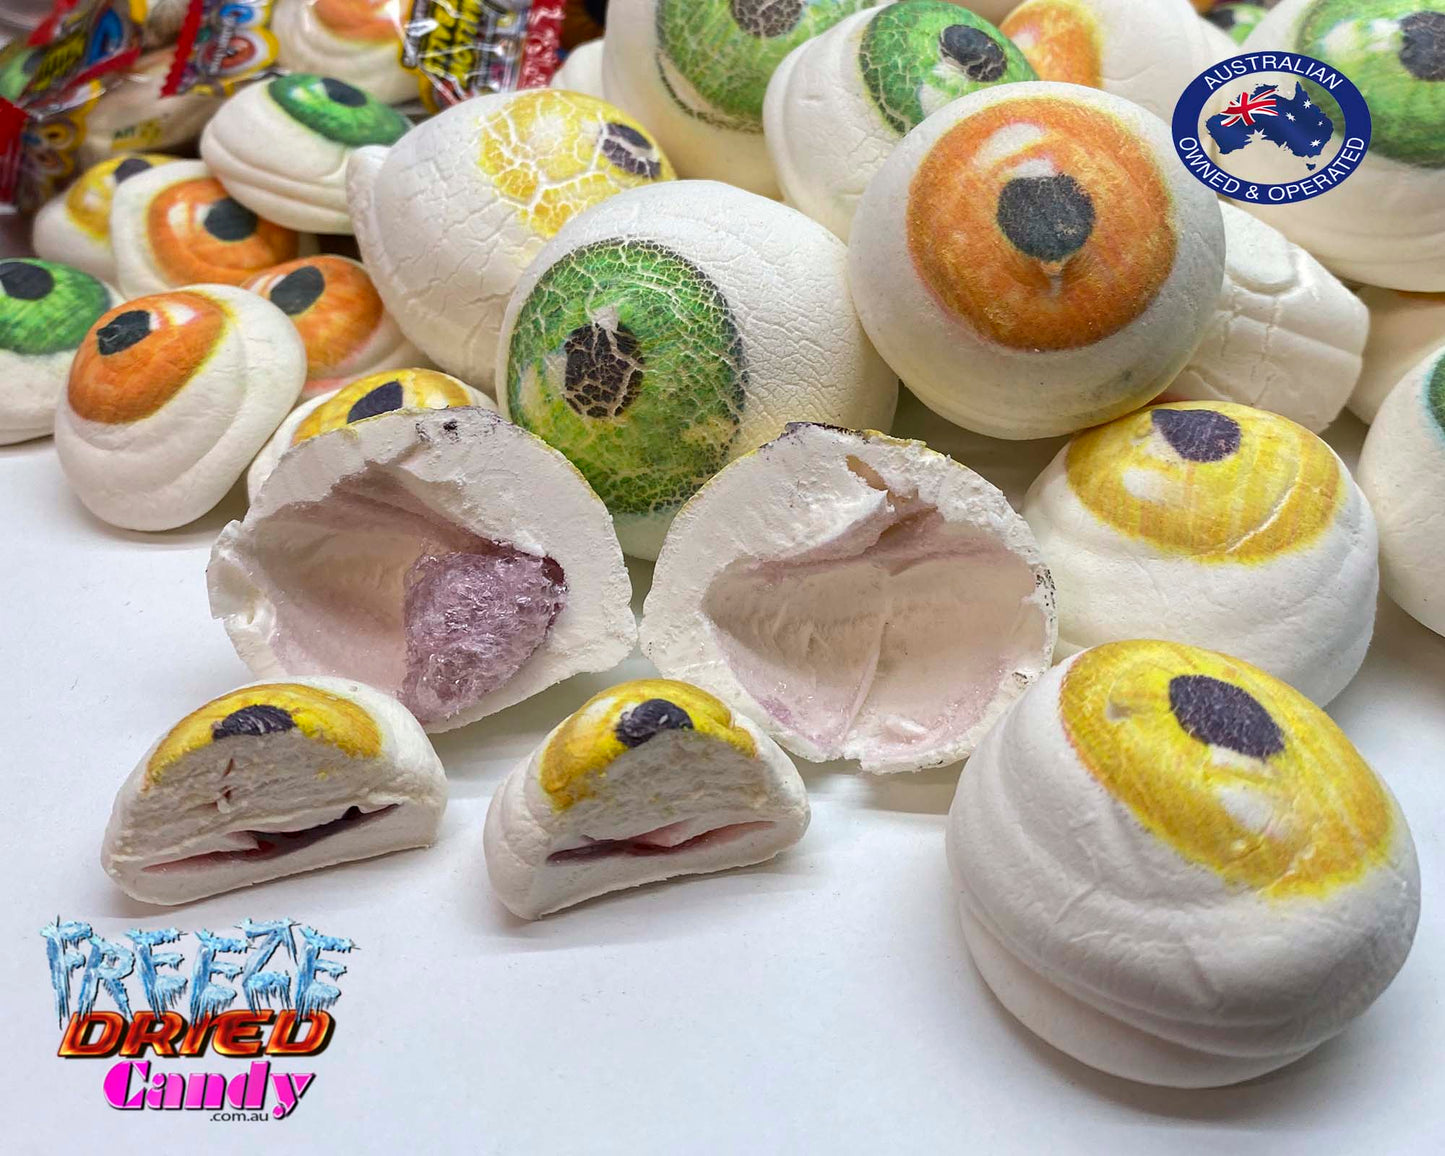  Freeze Dried Eyeballs - Marshmallow with Jam Filling - Freeze Dried Candy Lollies & Treats Try Marshmallow in a whole new fun way!!  Mallow Eyeballs all puffed up, no longer squishy, now transformed into yummy, lighter than air, irresistibly crunchy, melt in your mouth treat,  that is super addictive !   